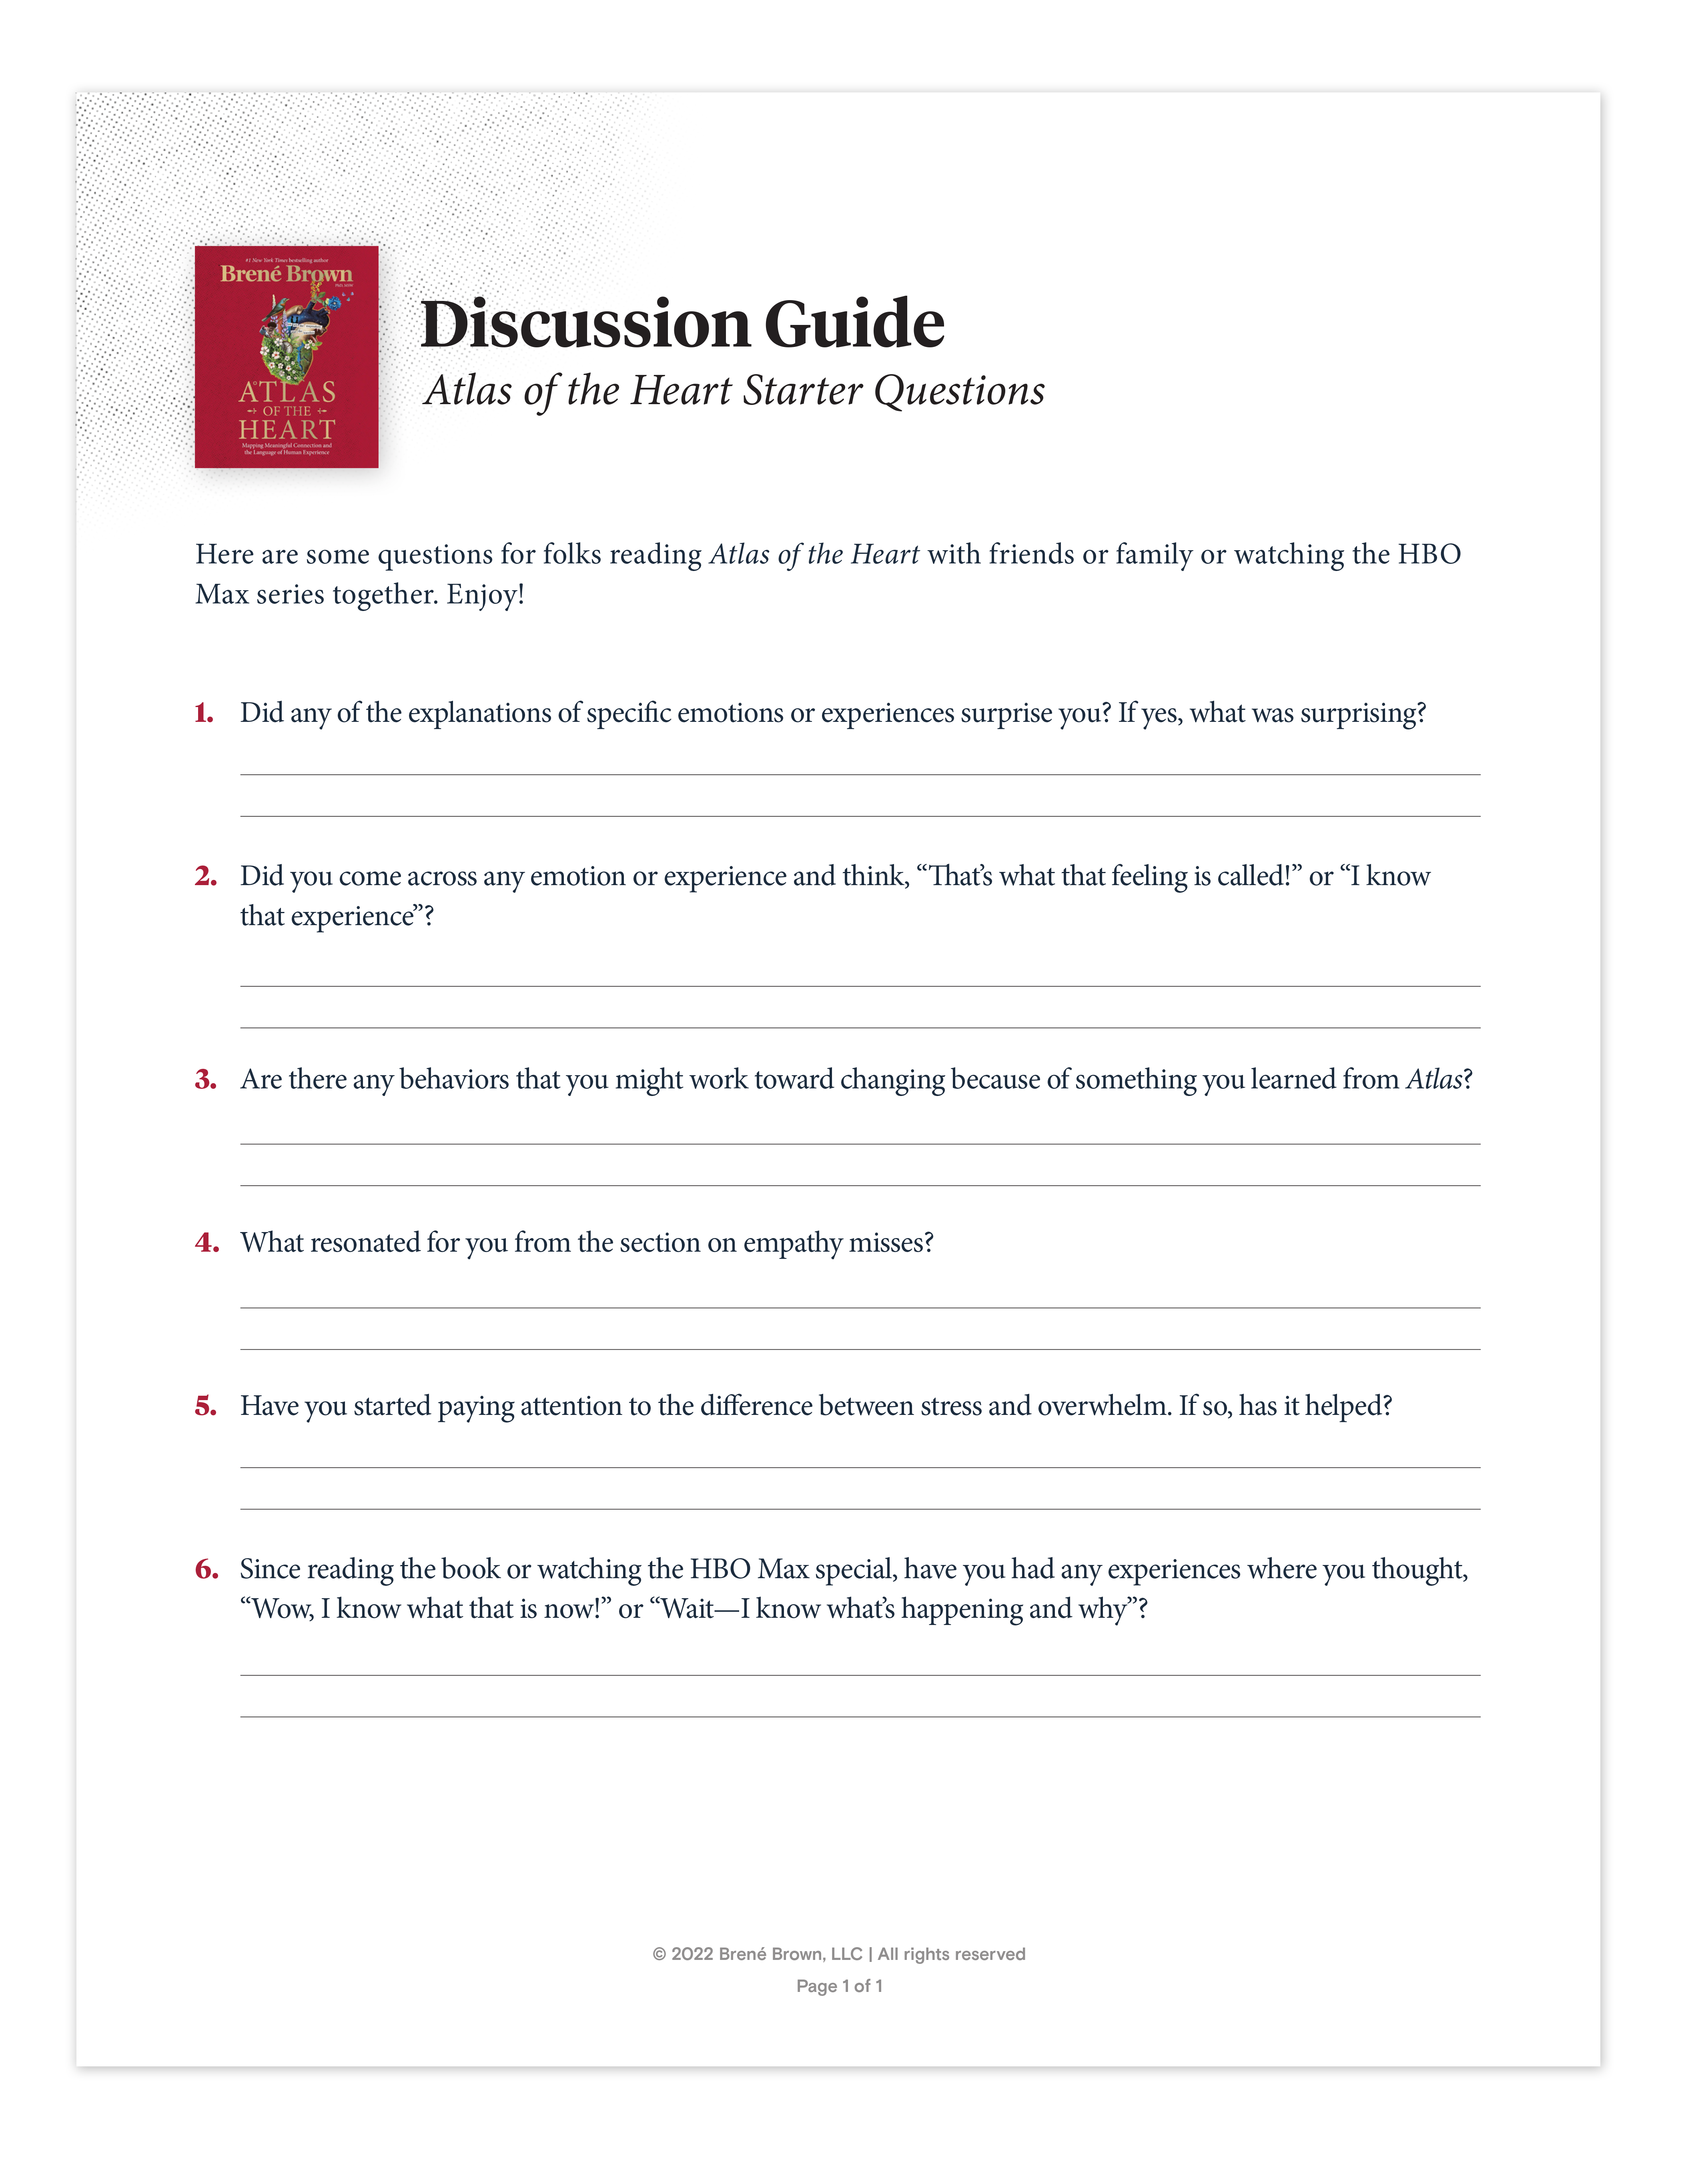 atlas of the heart discussion guide brene brown